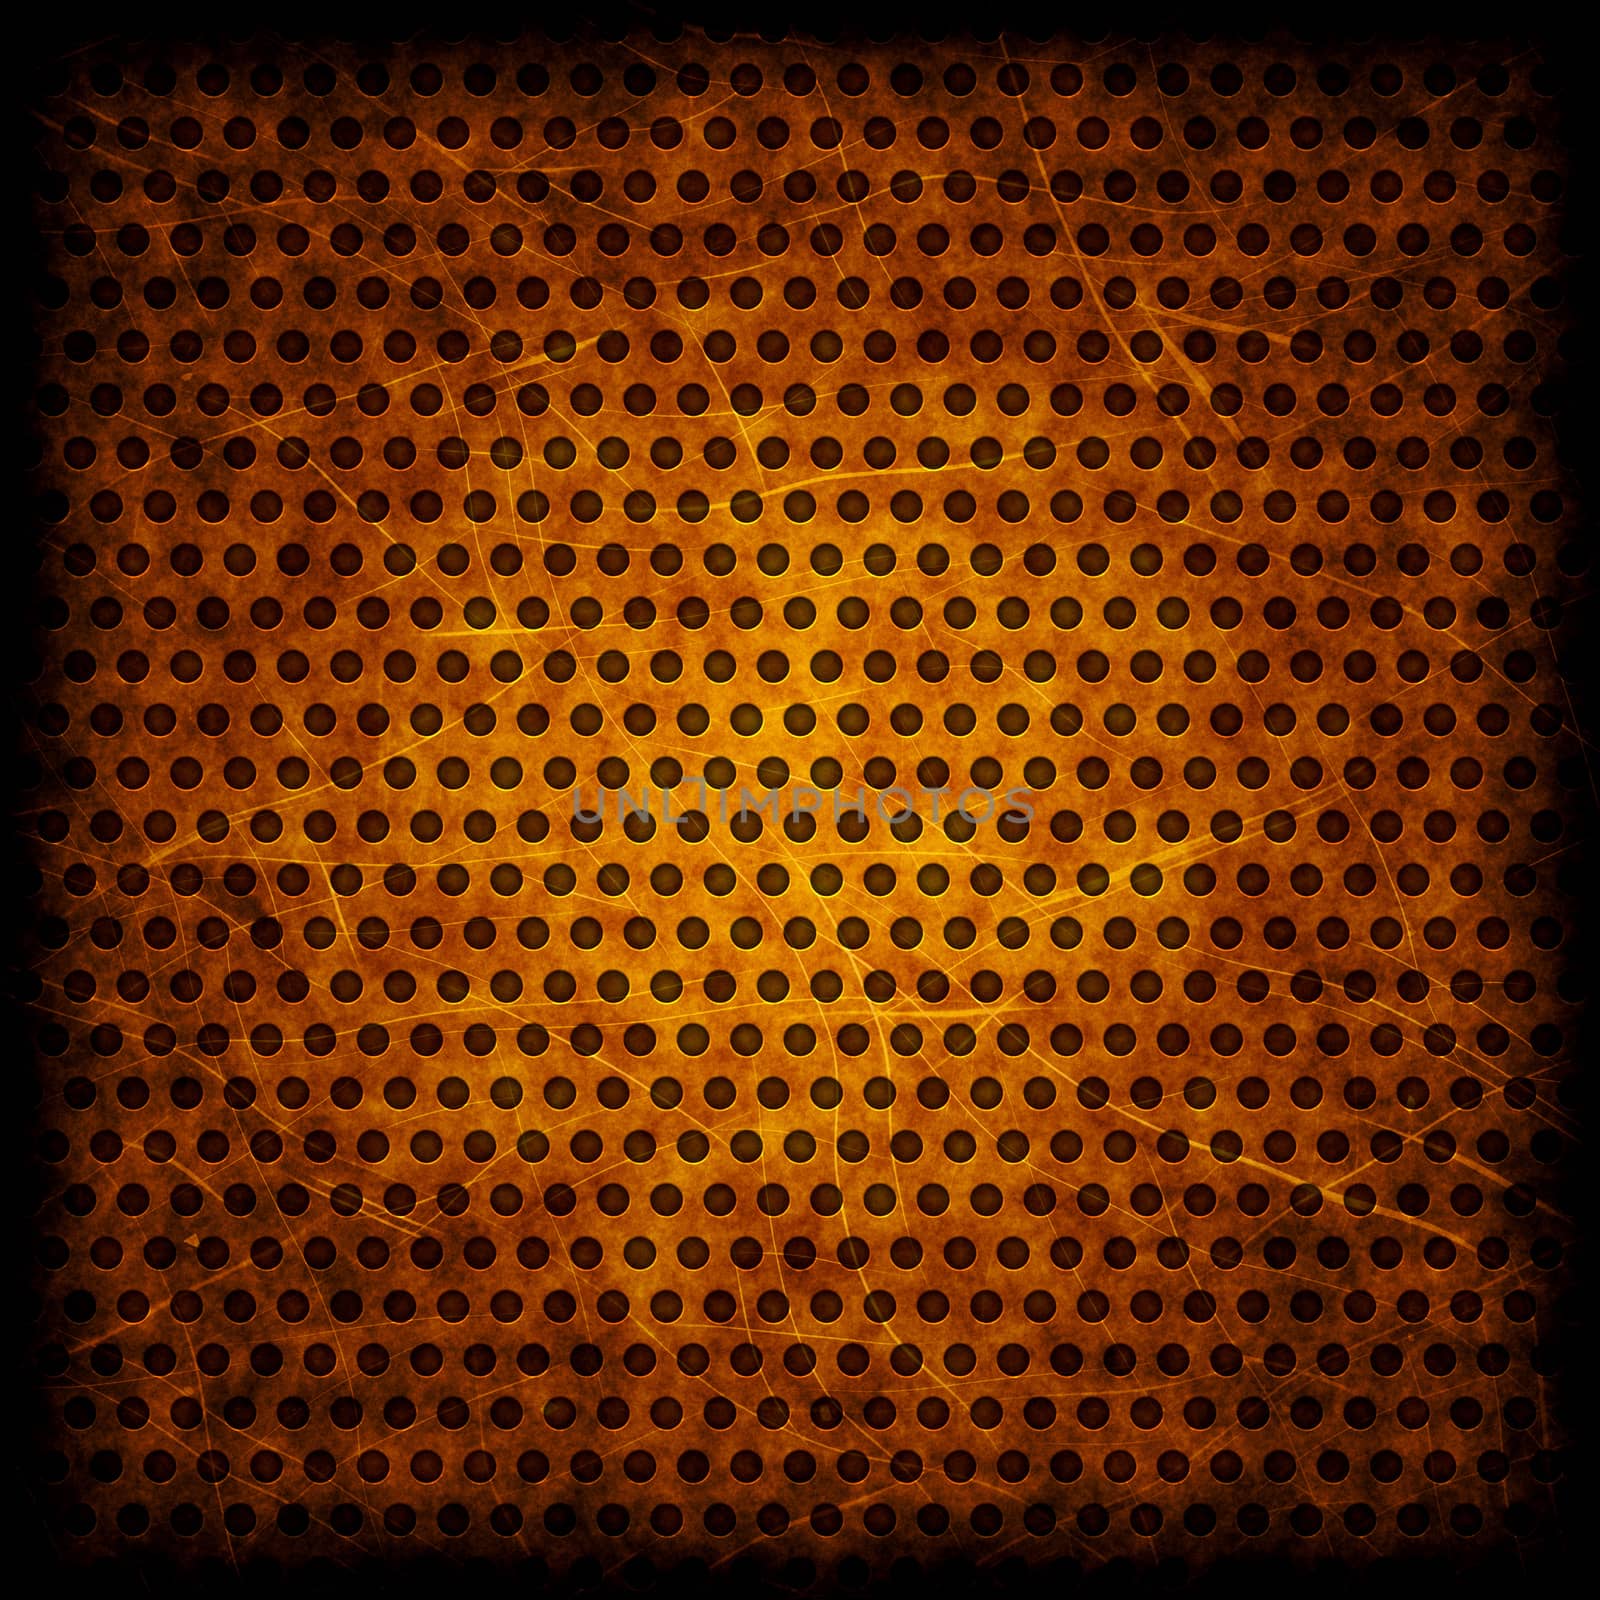 Brown grunge background of circle pattern texture by Attila